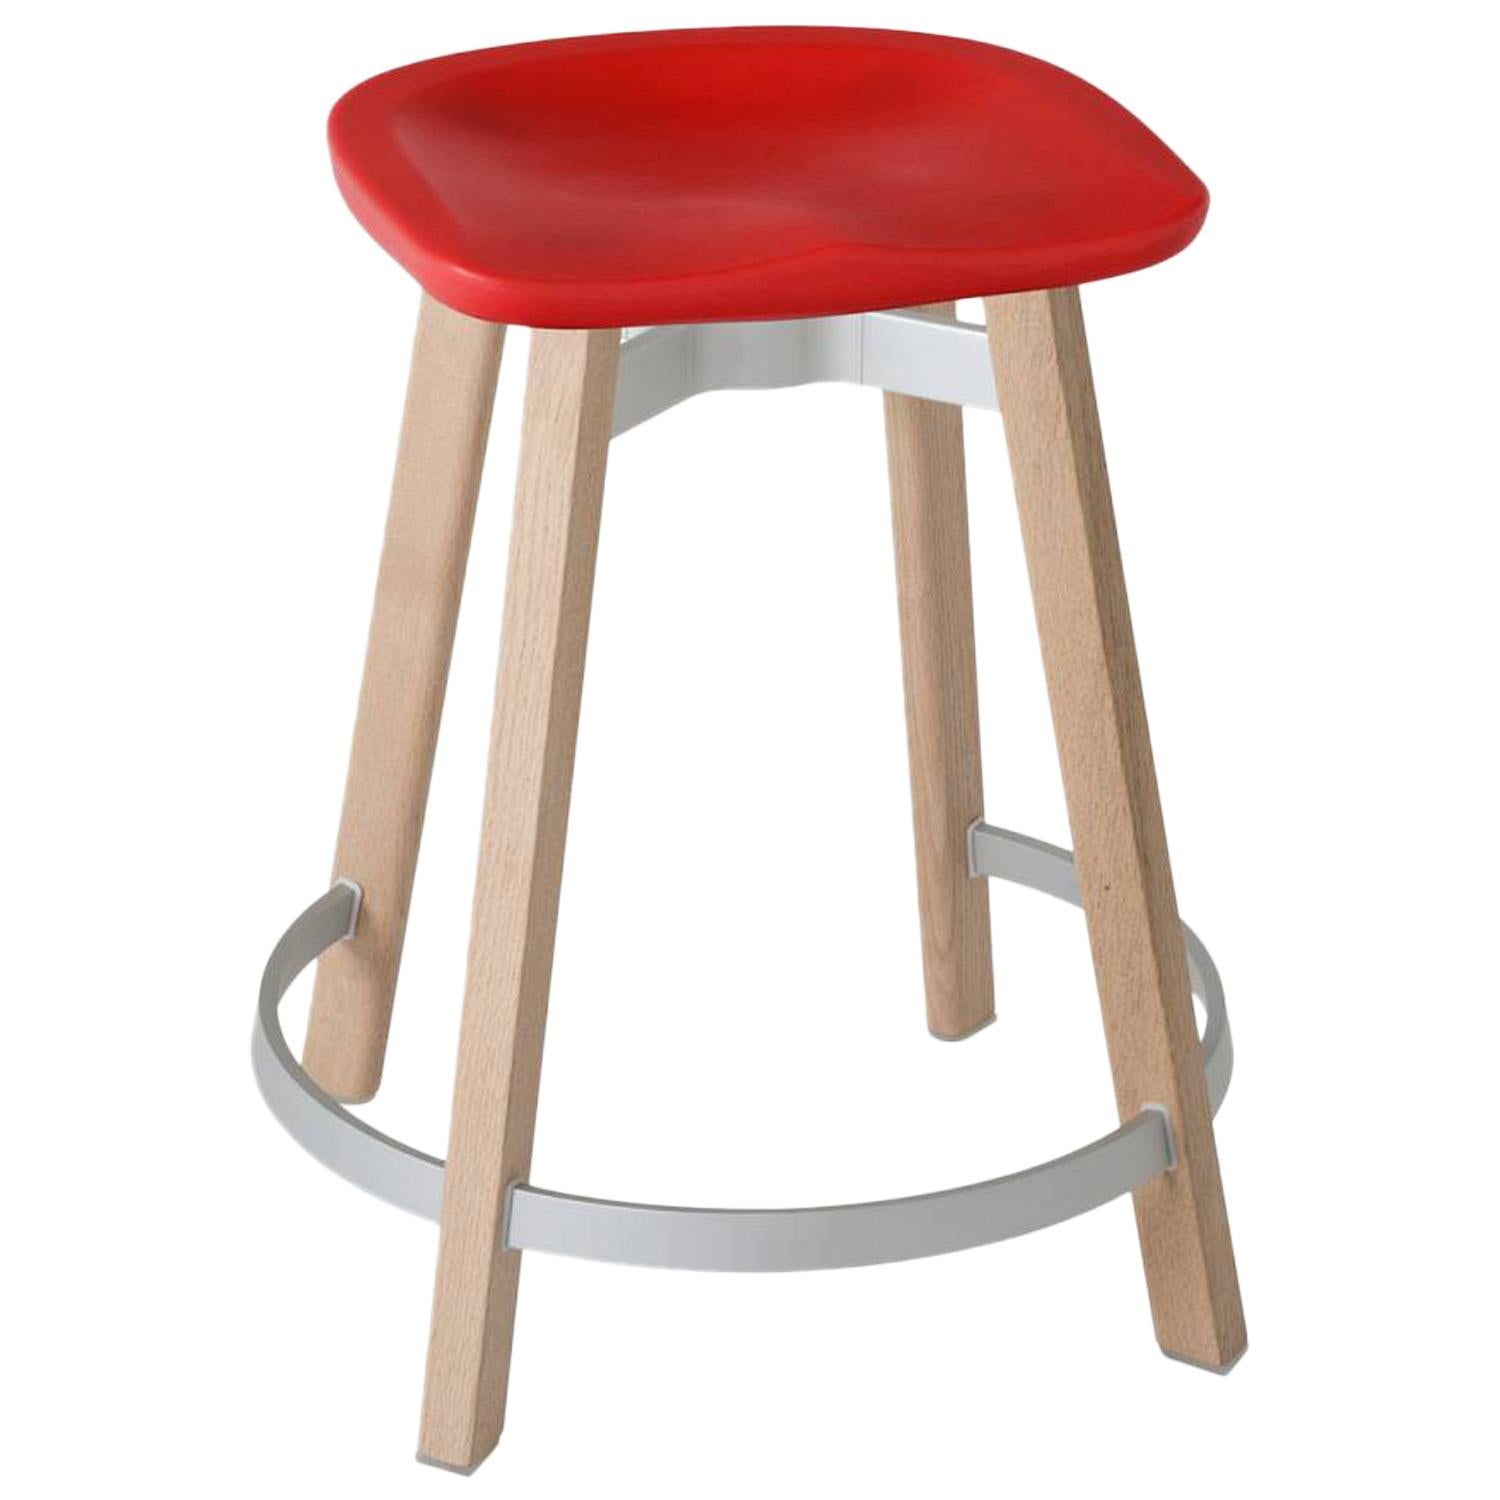 Emeco Su Counter Stool in Wood with Red Seat by Nendo